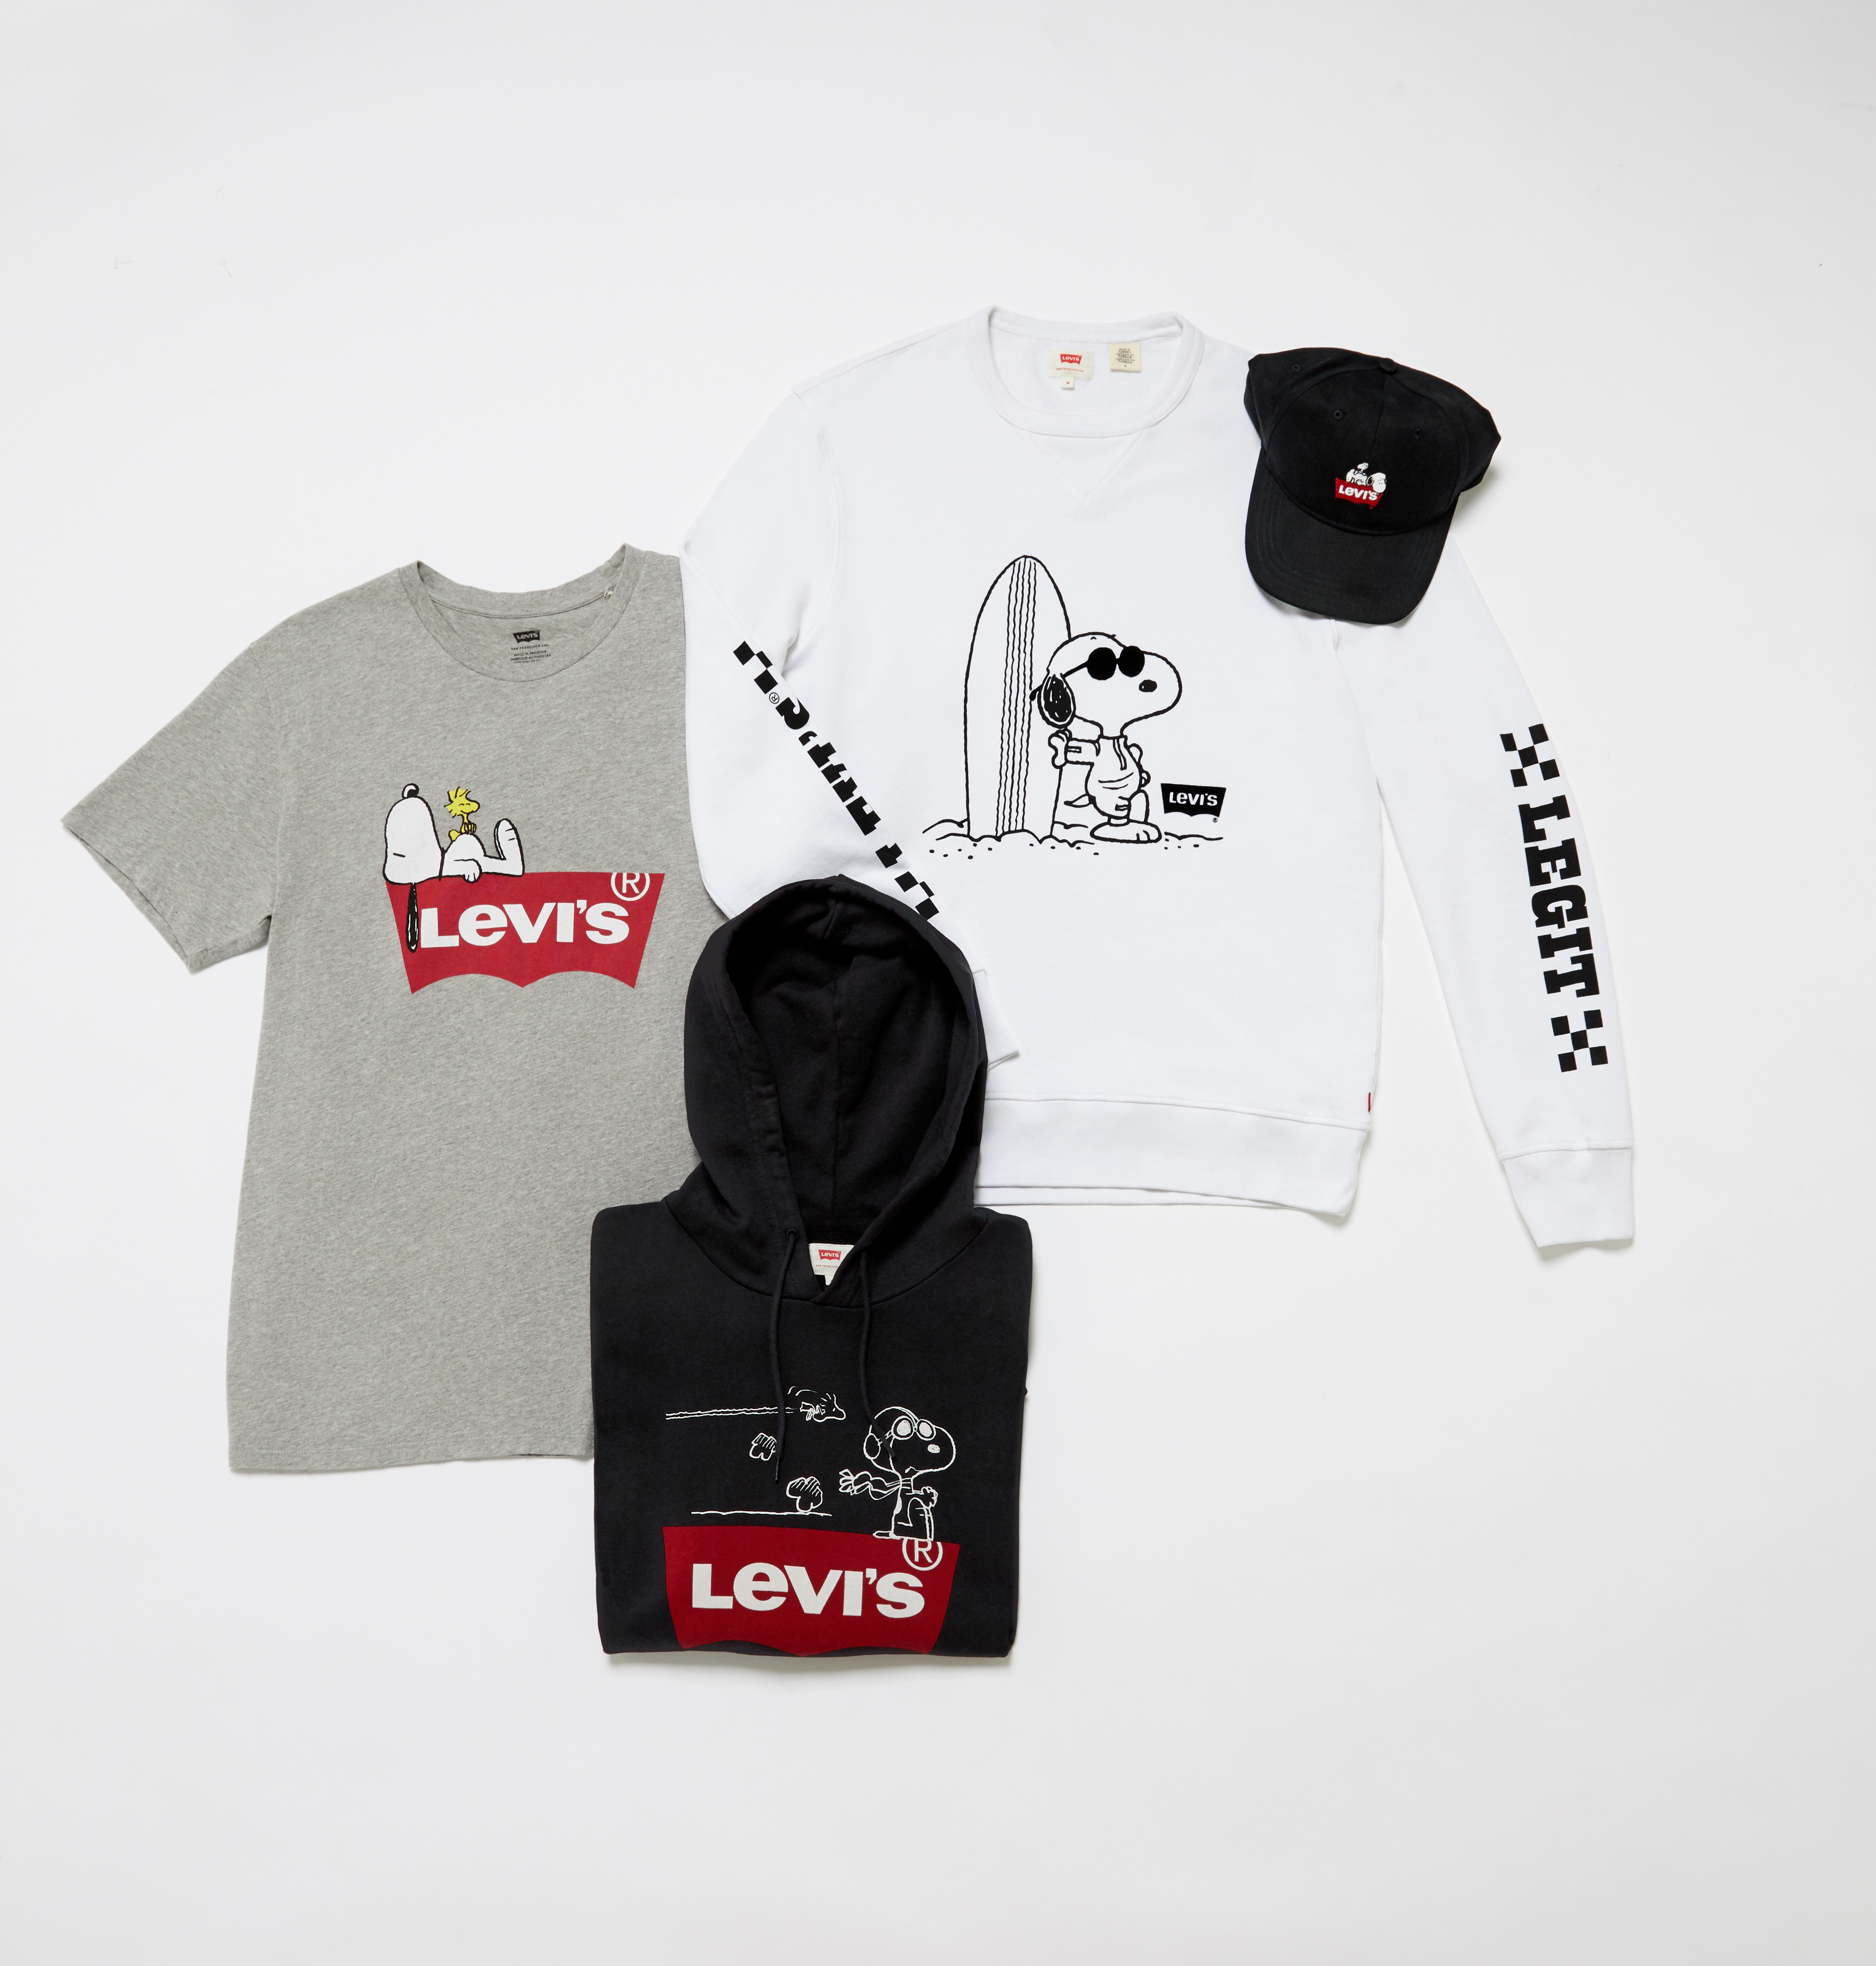 A picture of the Levi's X Peanuts collaboration featuring sweatshirts, T-shirts and accessories. Available at ASOS.